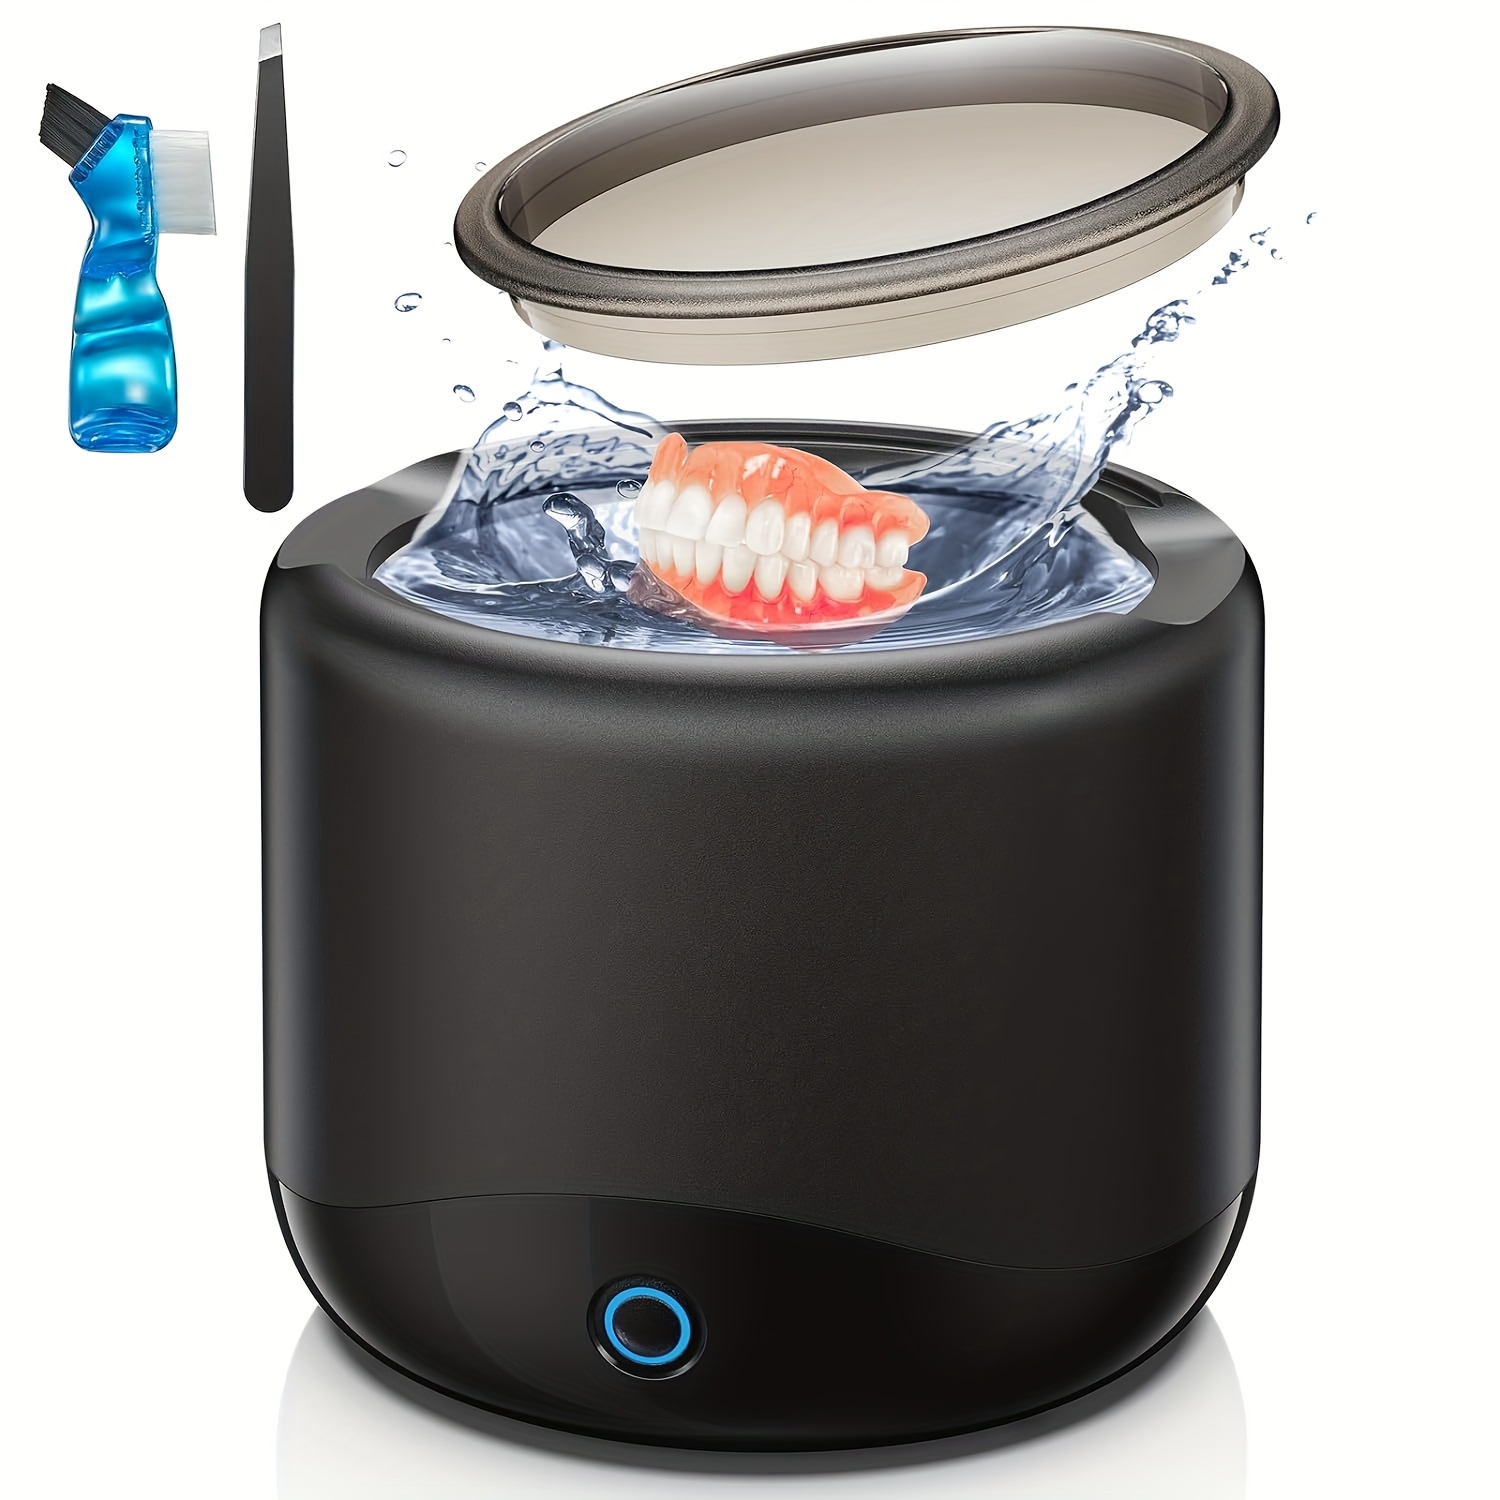 

Ultrasonic Cleaner Retainer Cleaning Machine - 45khz Portable Ultra Dental Cleaner - Professional Cleaning Mouth Guard, Aligner, Denture, Toothbrush Head, Jewelry For Home Or Travel